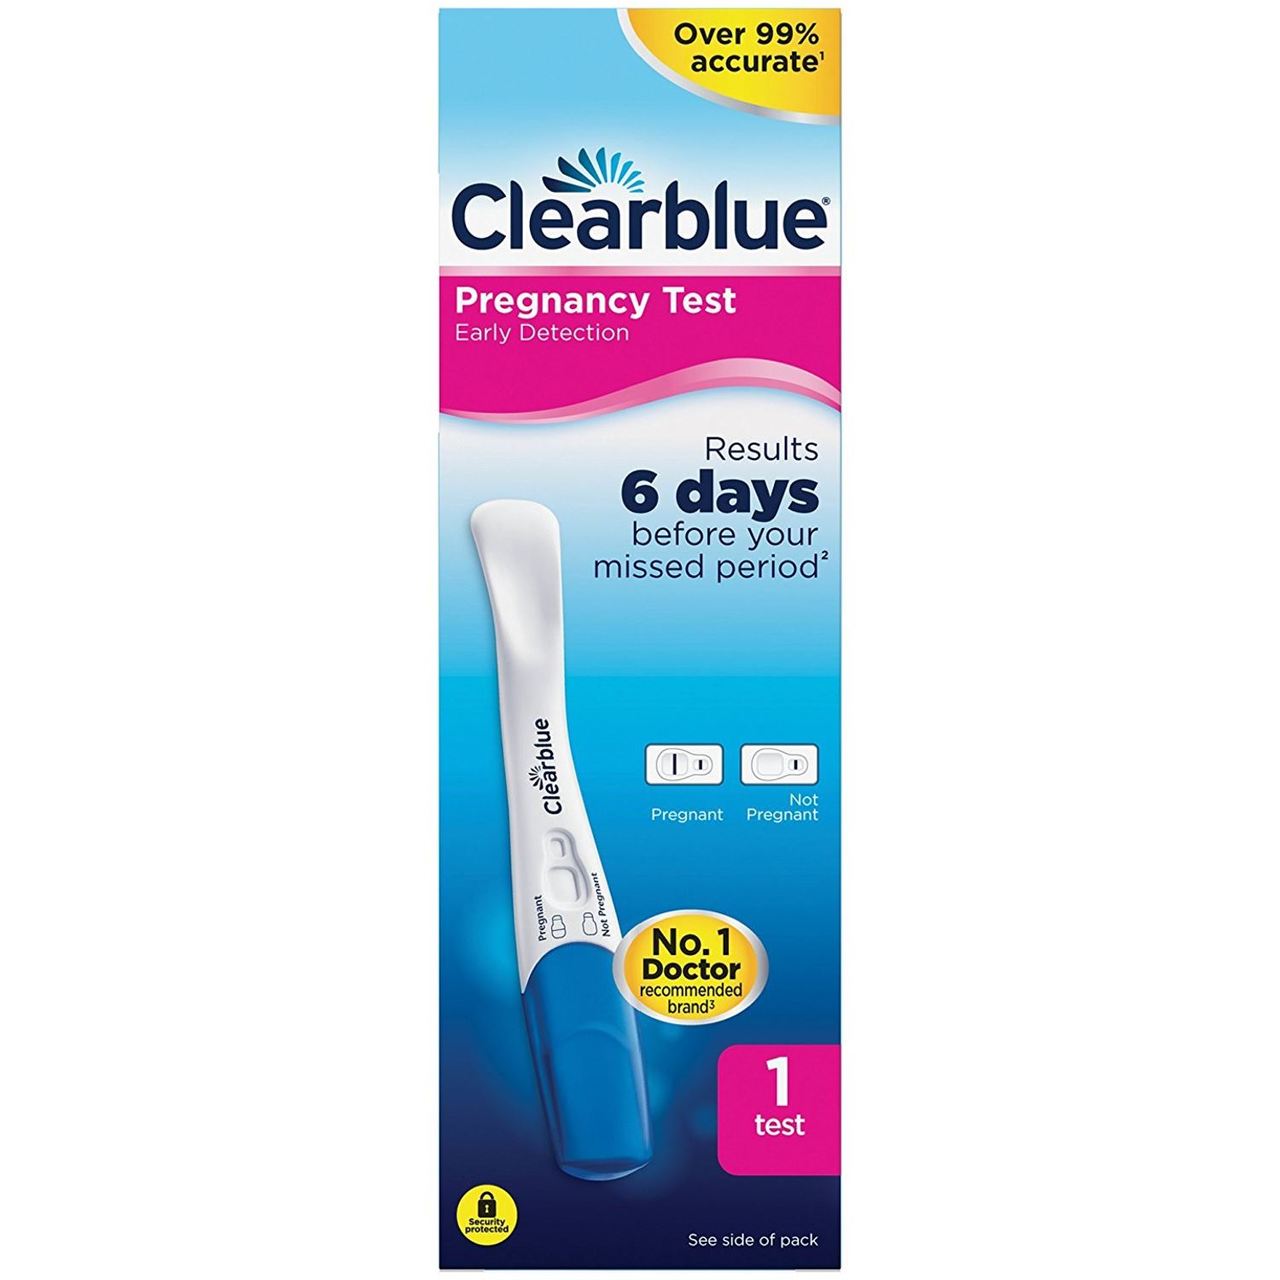 Clearblue Pregnancy Test (One test)